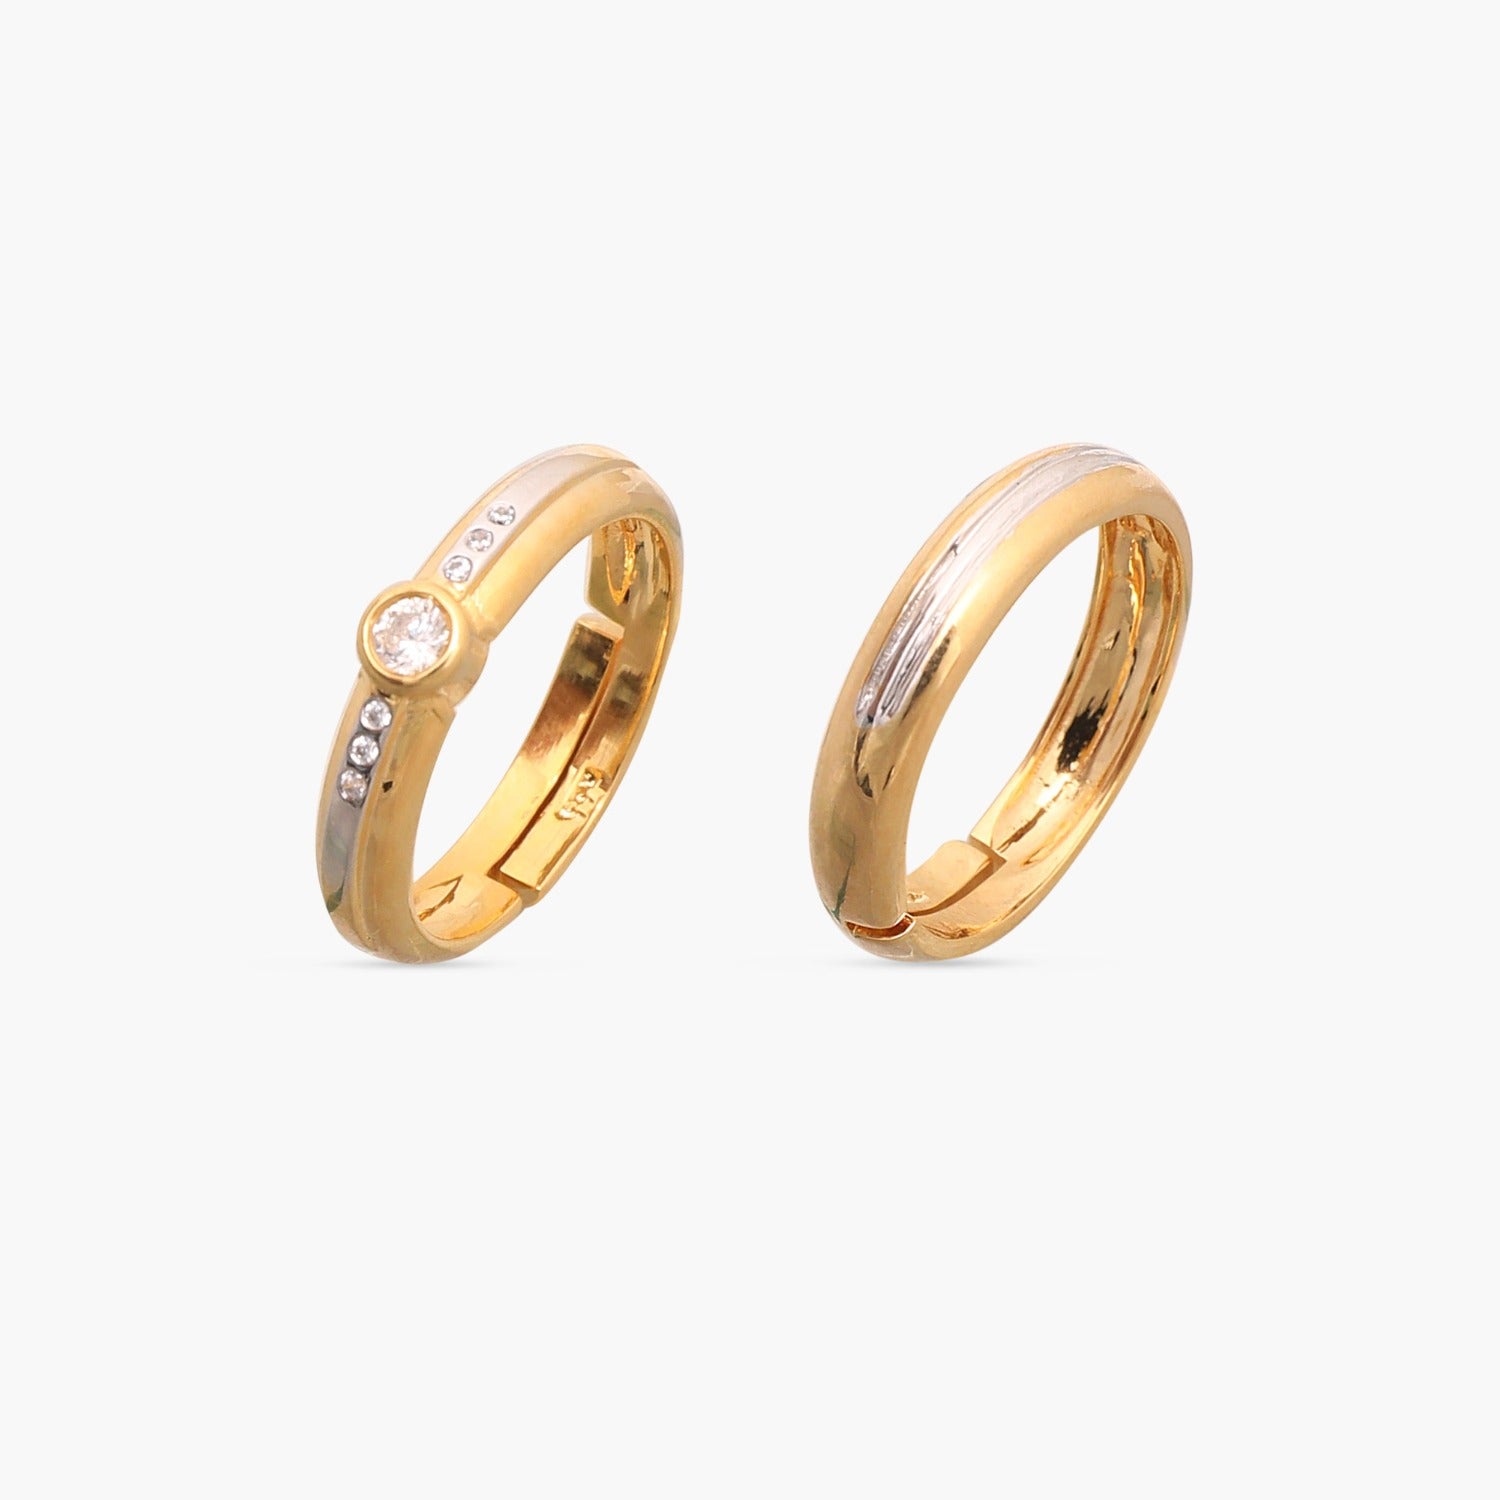 Buy quality 916 Fancy Plain Gold Couple Ring in Ahmedabad